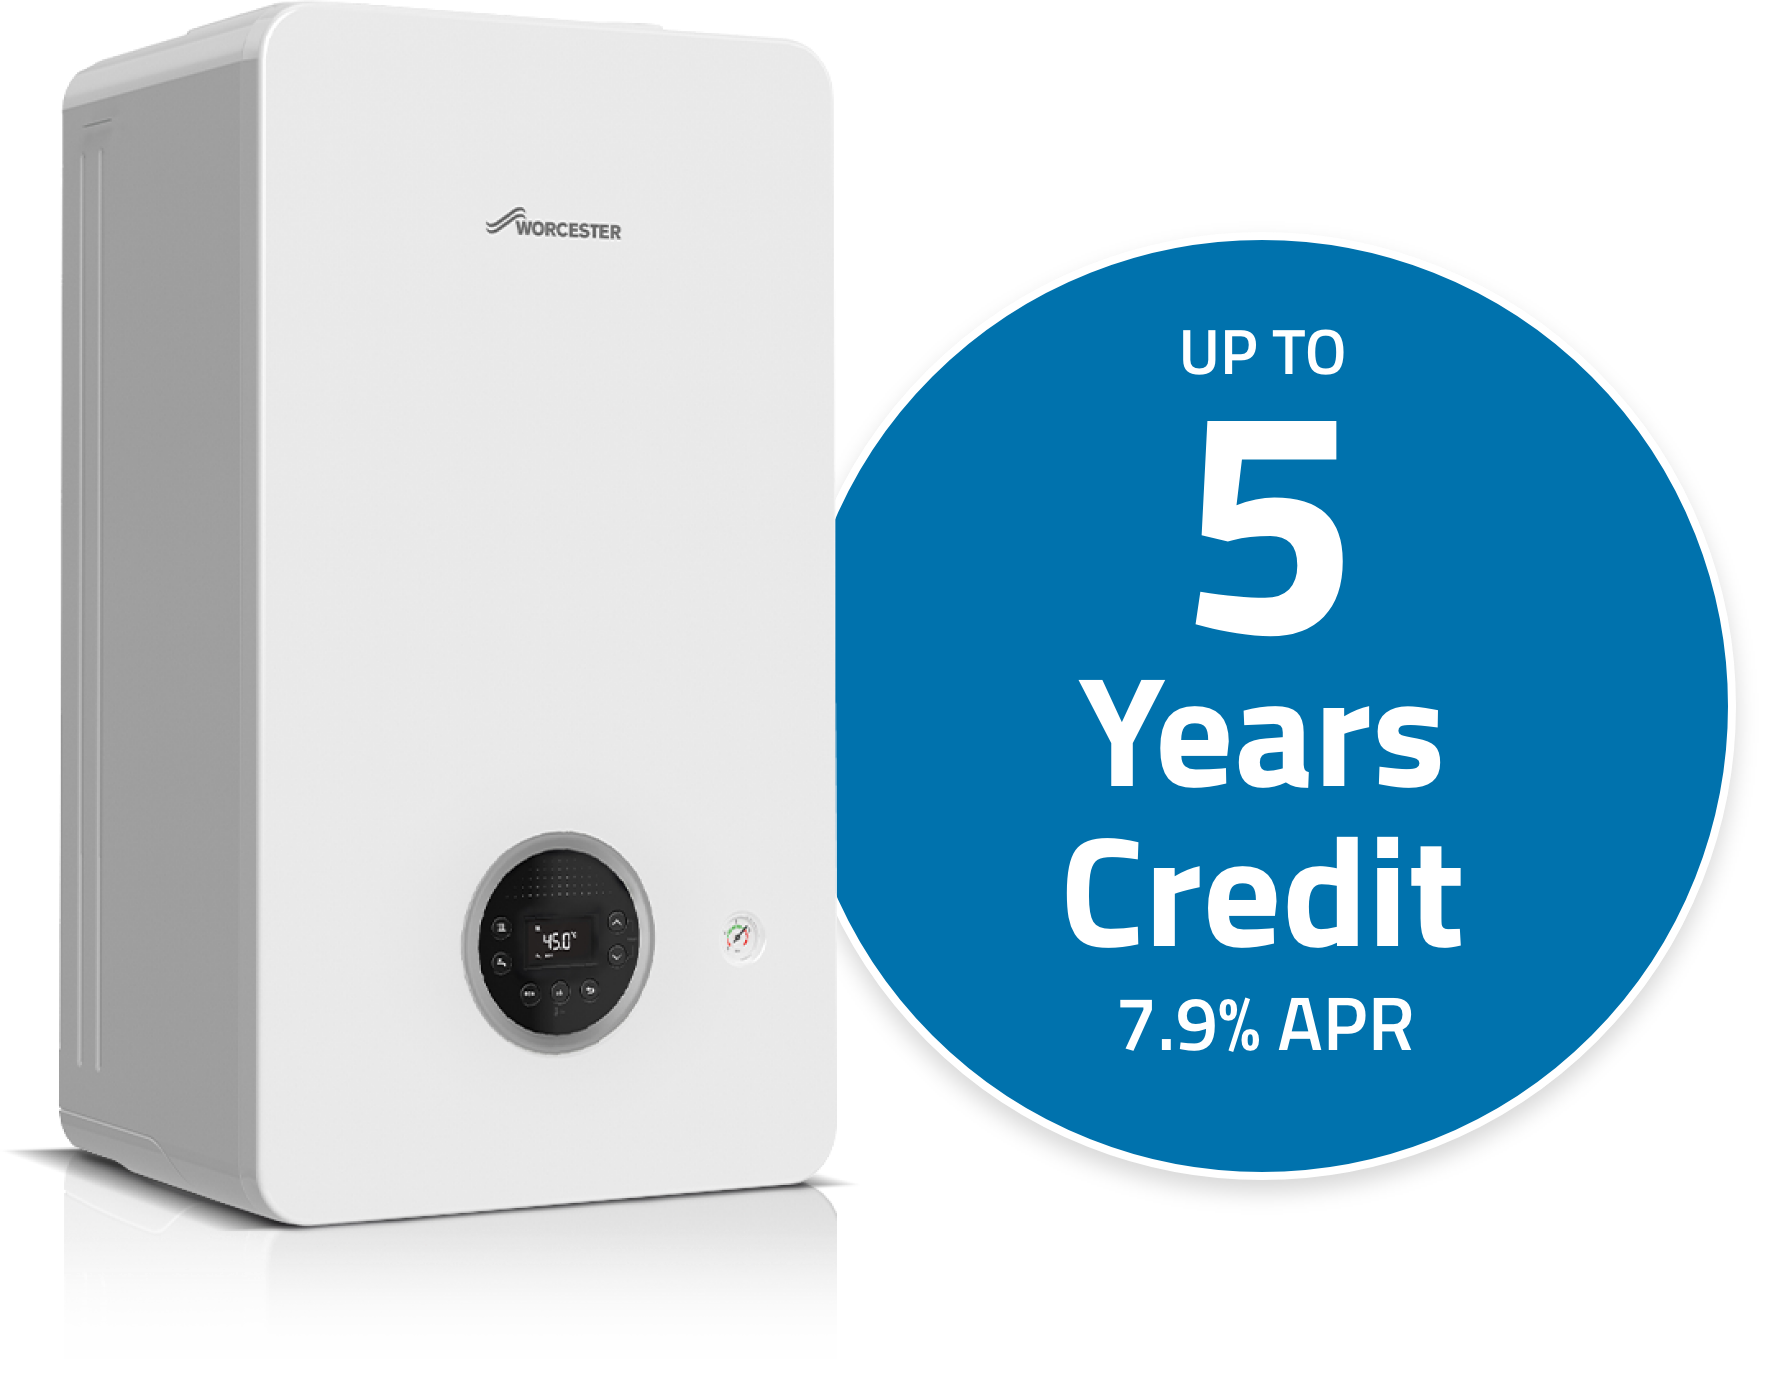 Up to 5 Years Credit (7.9% APR)